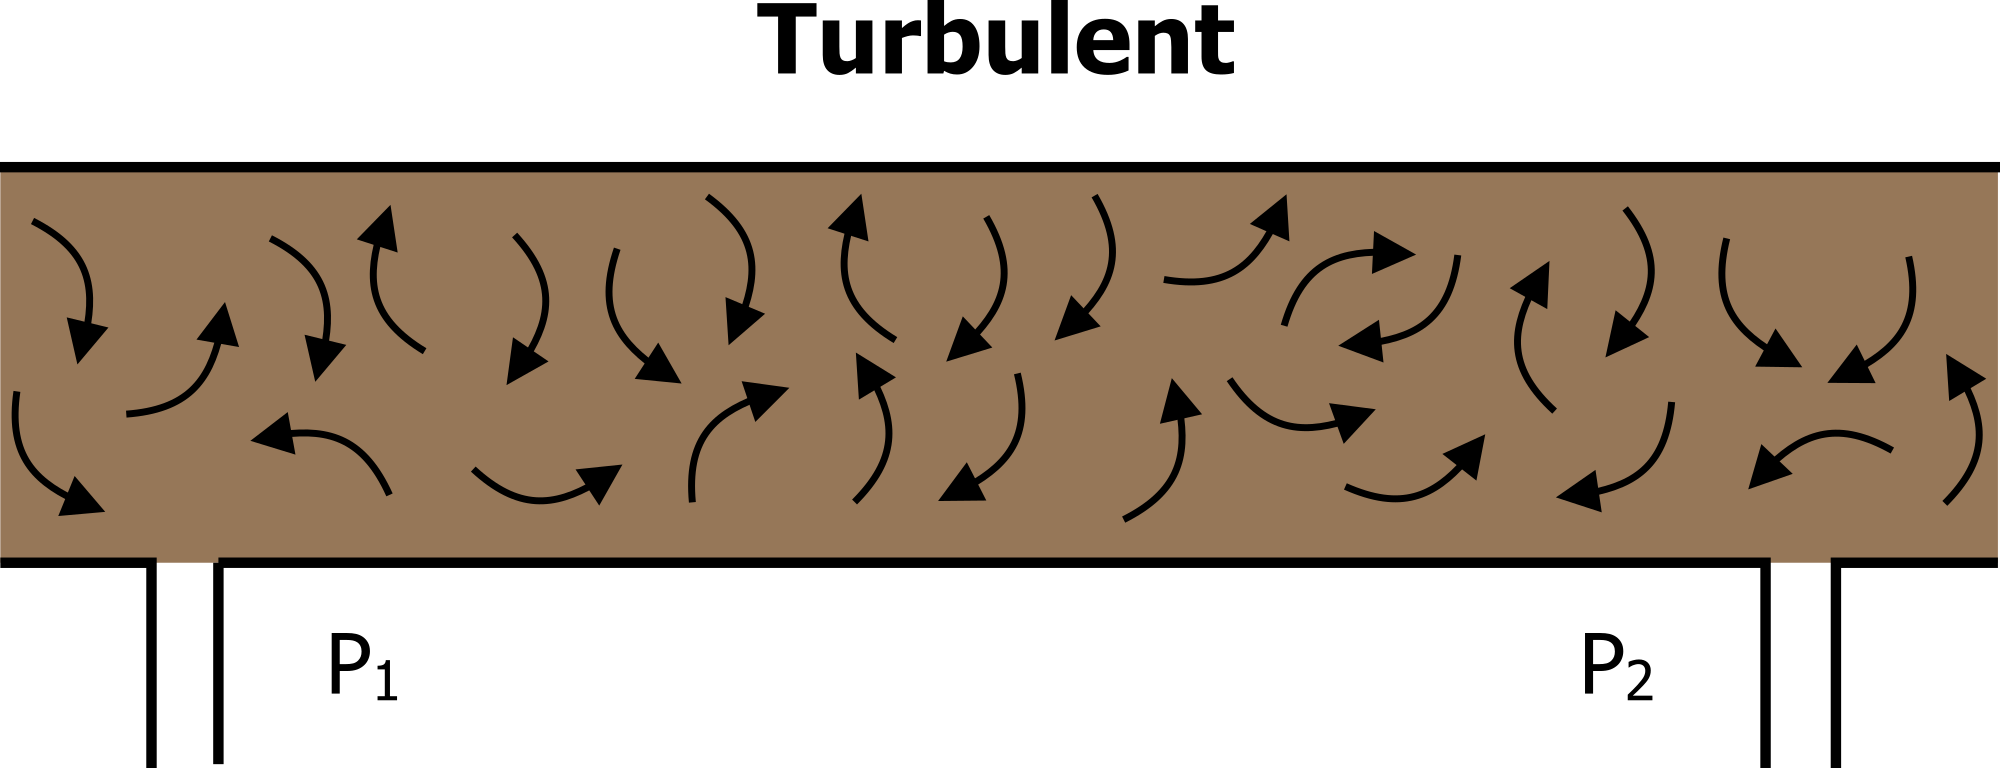 A rectangle with many curved arrows pointing various directions. There are two openings at the bottom labeled P1 on the left and P2 on the right